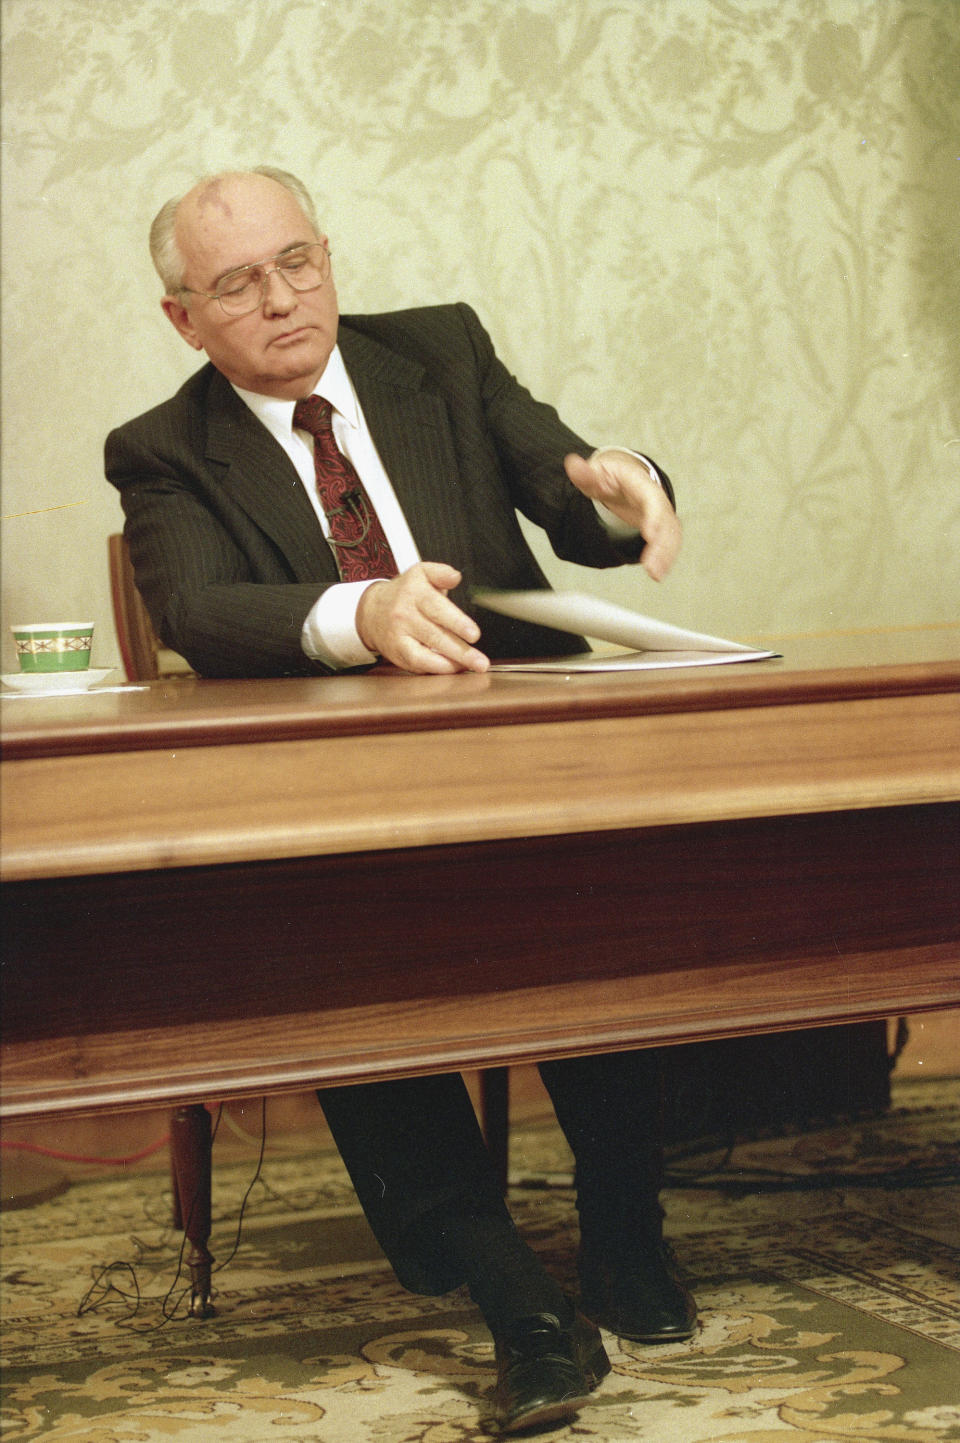 FILE - Mikhail Gorbachev, eighth and final leader of the Soviet Union, closes his resignation speech on the table after delivering it on Soviet television in the Kremlin, Moscow, Wednesday, Dec. 25, 1991. It was a momentous event that ended an era 30 years ago - Soviet President Mikhail Gorbachev's resignation drawing a line under the USSR's existence. The AP Moscow photo chief, Liu Heung Shing, was the only foreign photographer who captured the final moments of the Soviet Union on Dec. 25, 1991. (AP Photo/Liu Heung Shing, File)